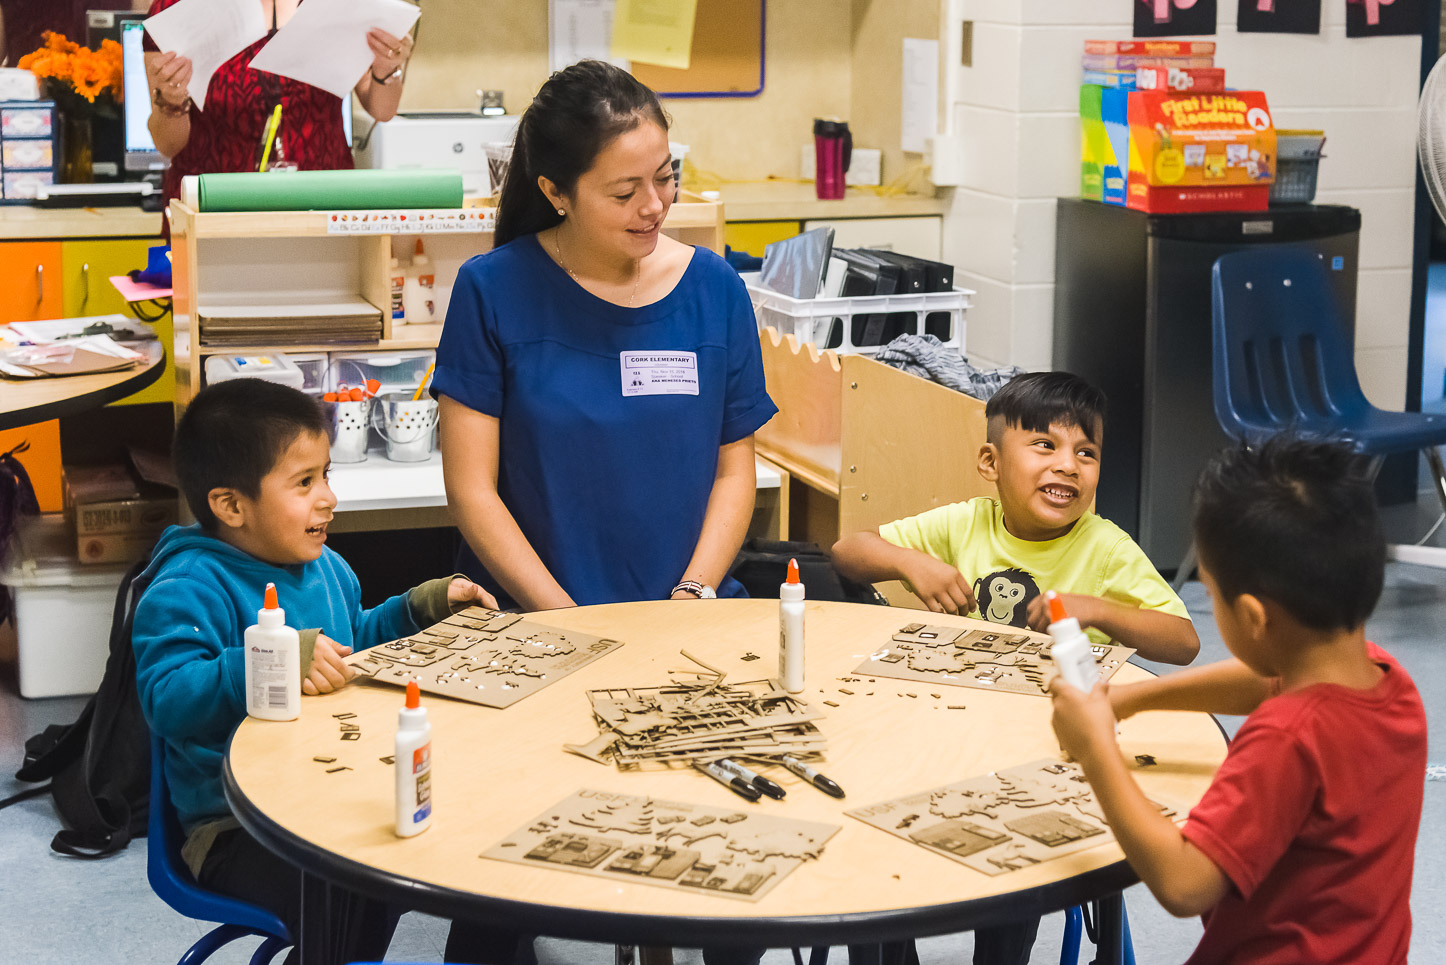 USF architecture student Ana Meneses sits at a table with three VPK students as they build model houses.